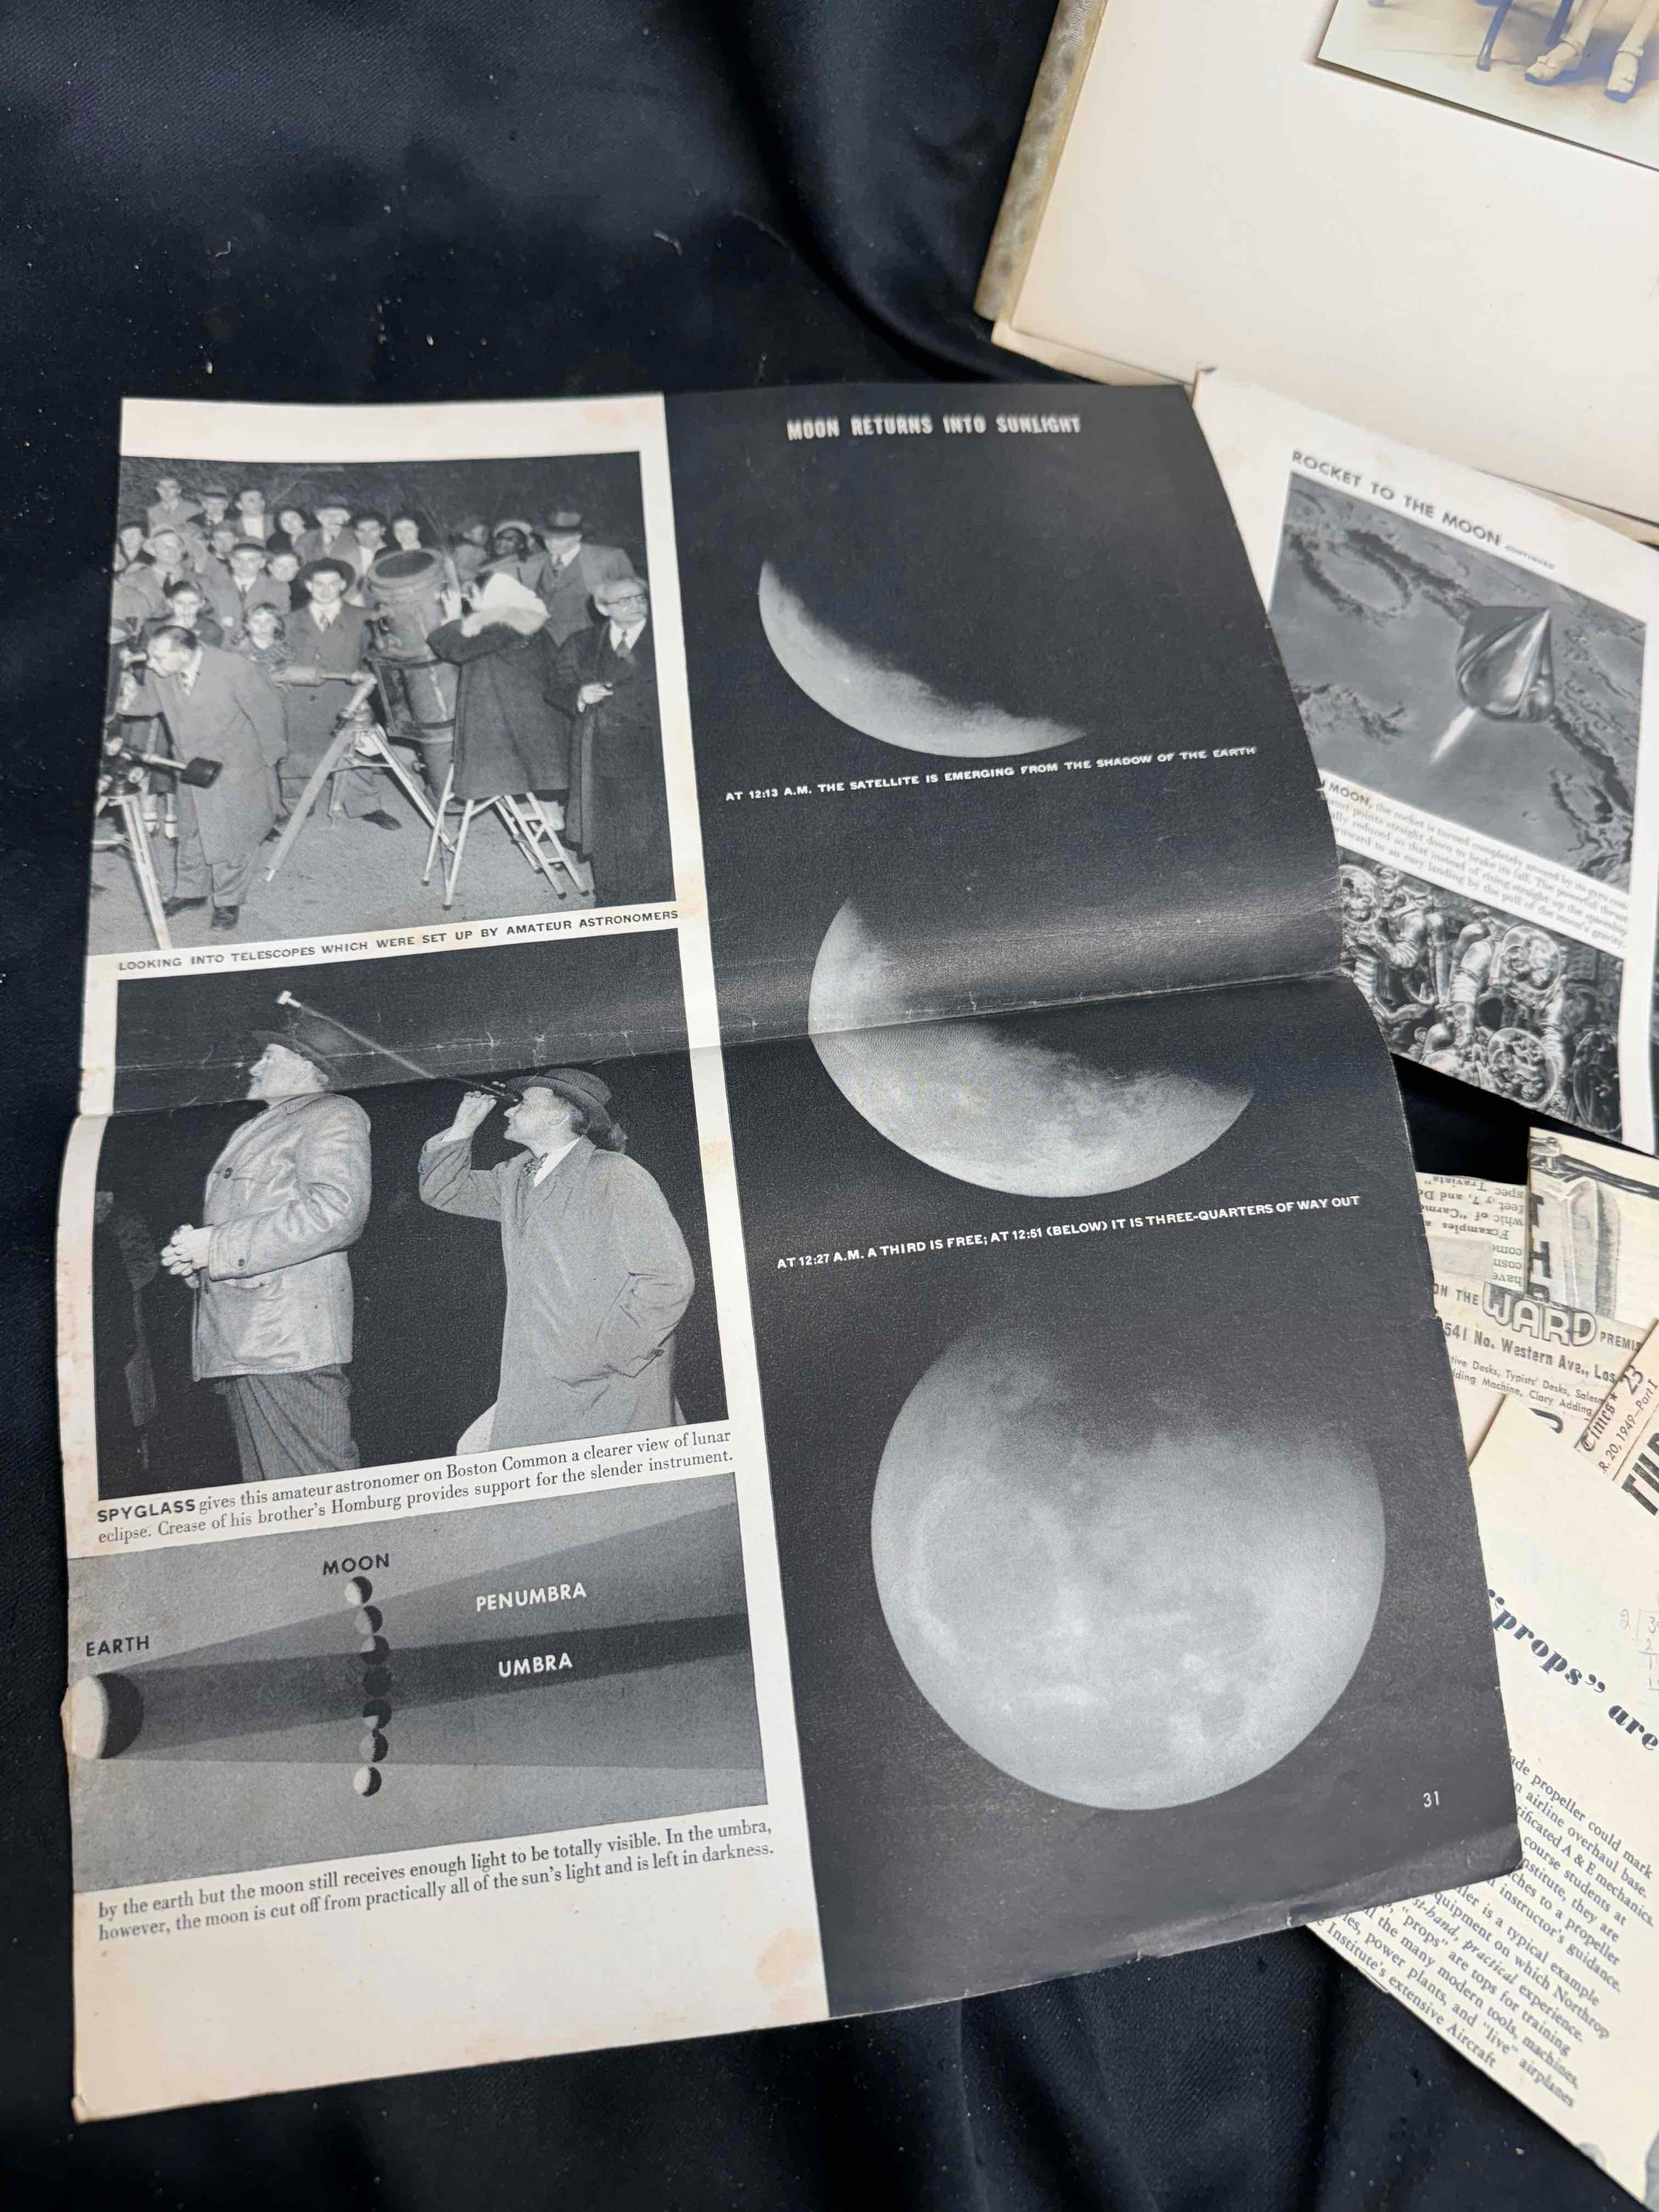 Vintage Ephemera 1940s-50s Old Photographs, Newspaper Articles. Moon, Military more